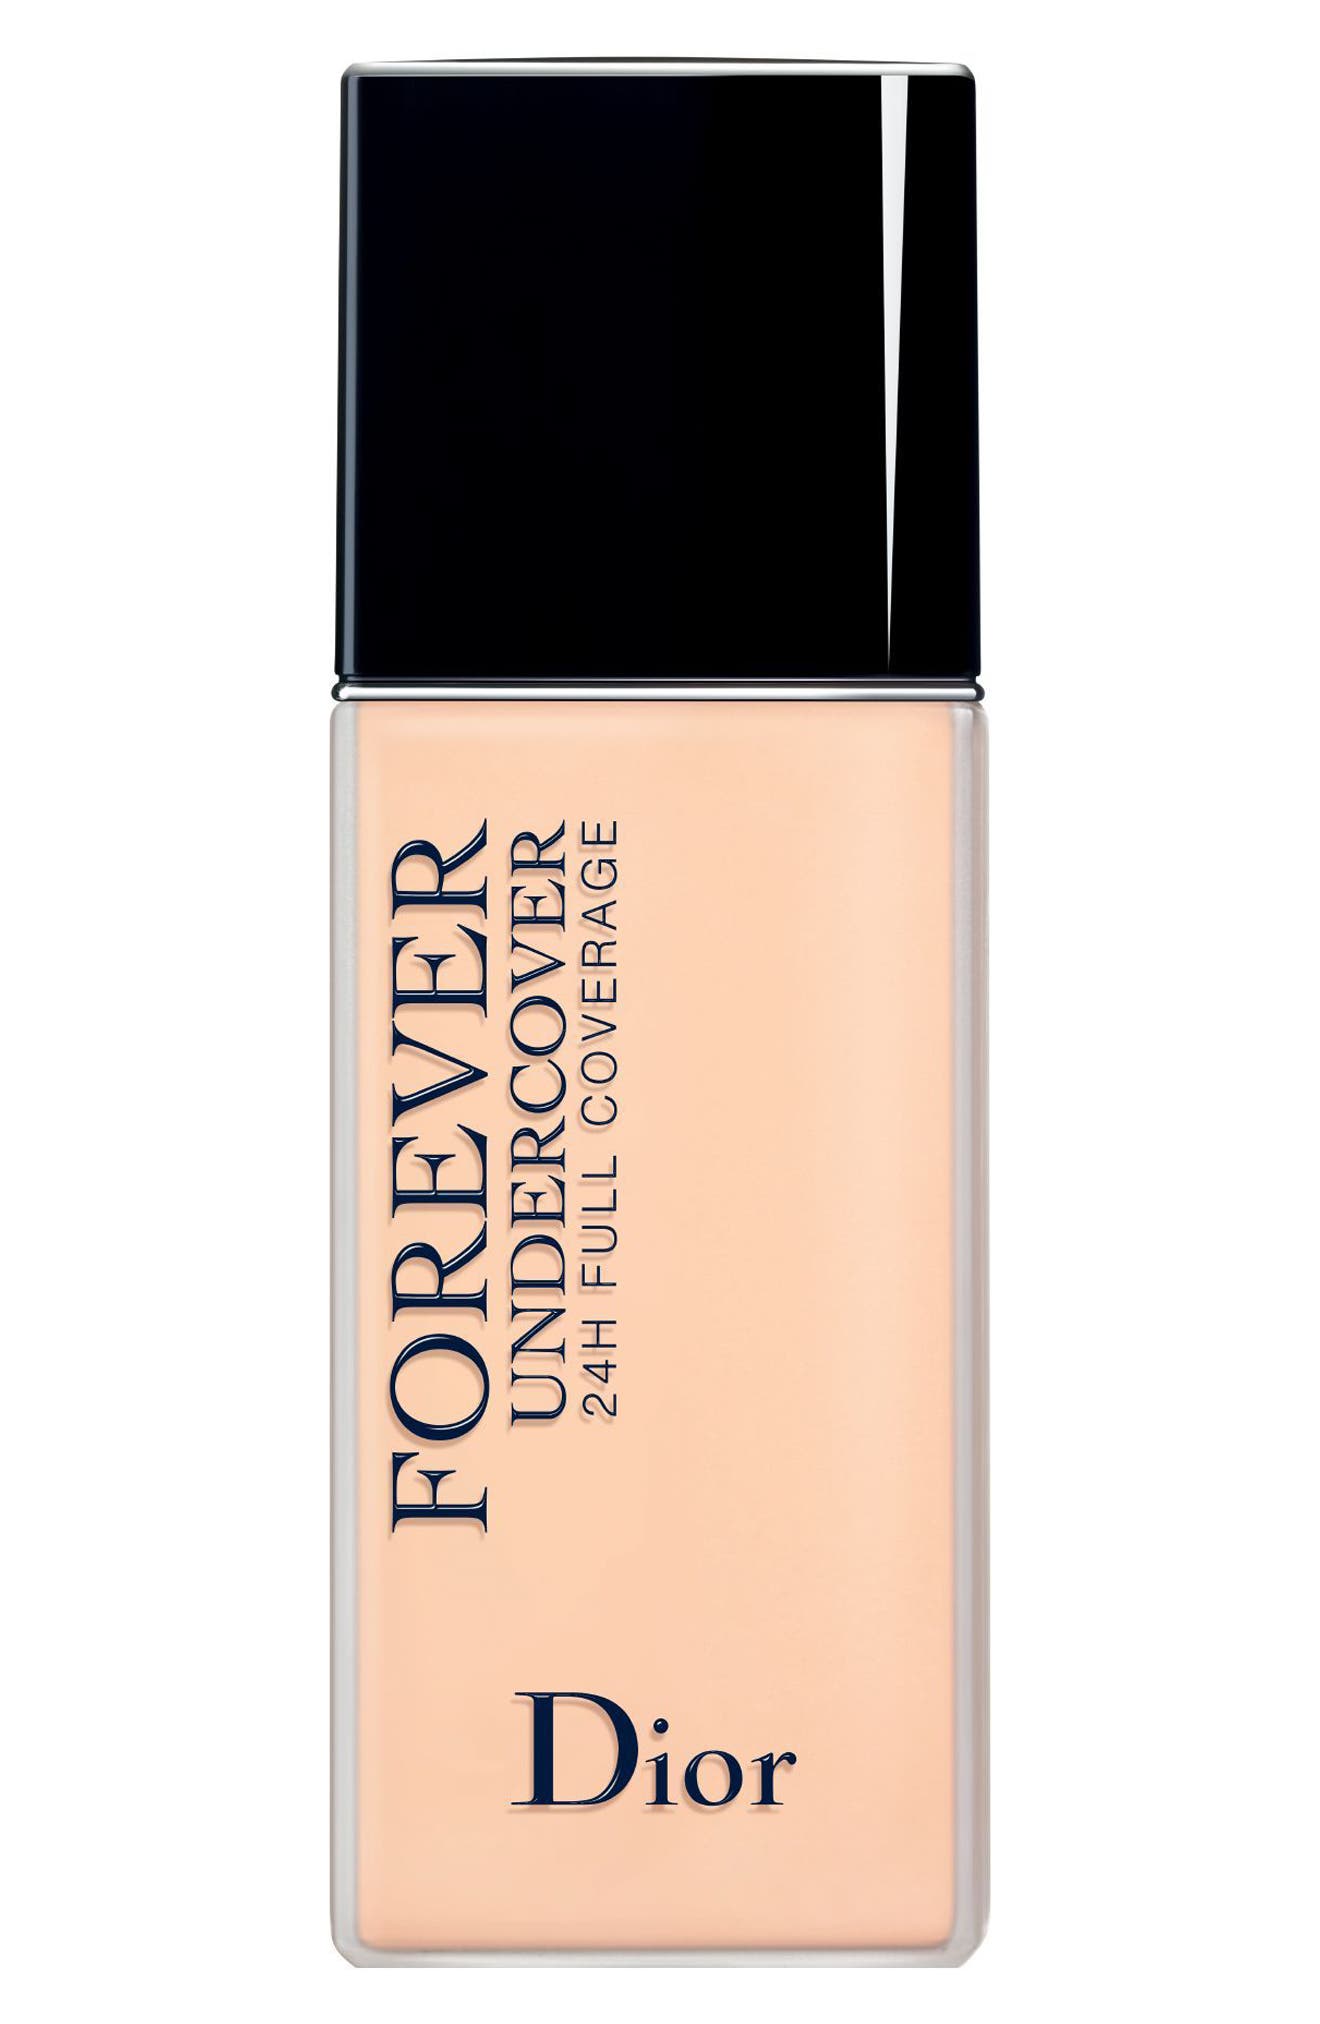 EAN 3348901383509 product image for Diorskin Forever Undercover 24-Hour Full Coverage Liquid Foundation in 015 Tende | upcitemdb.com